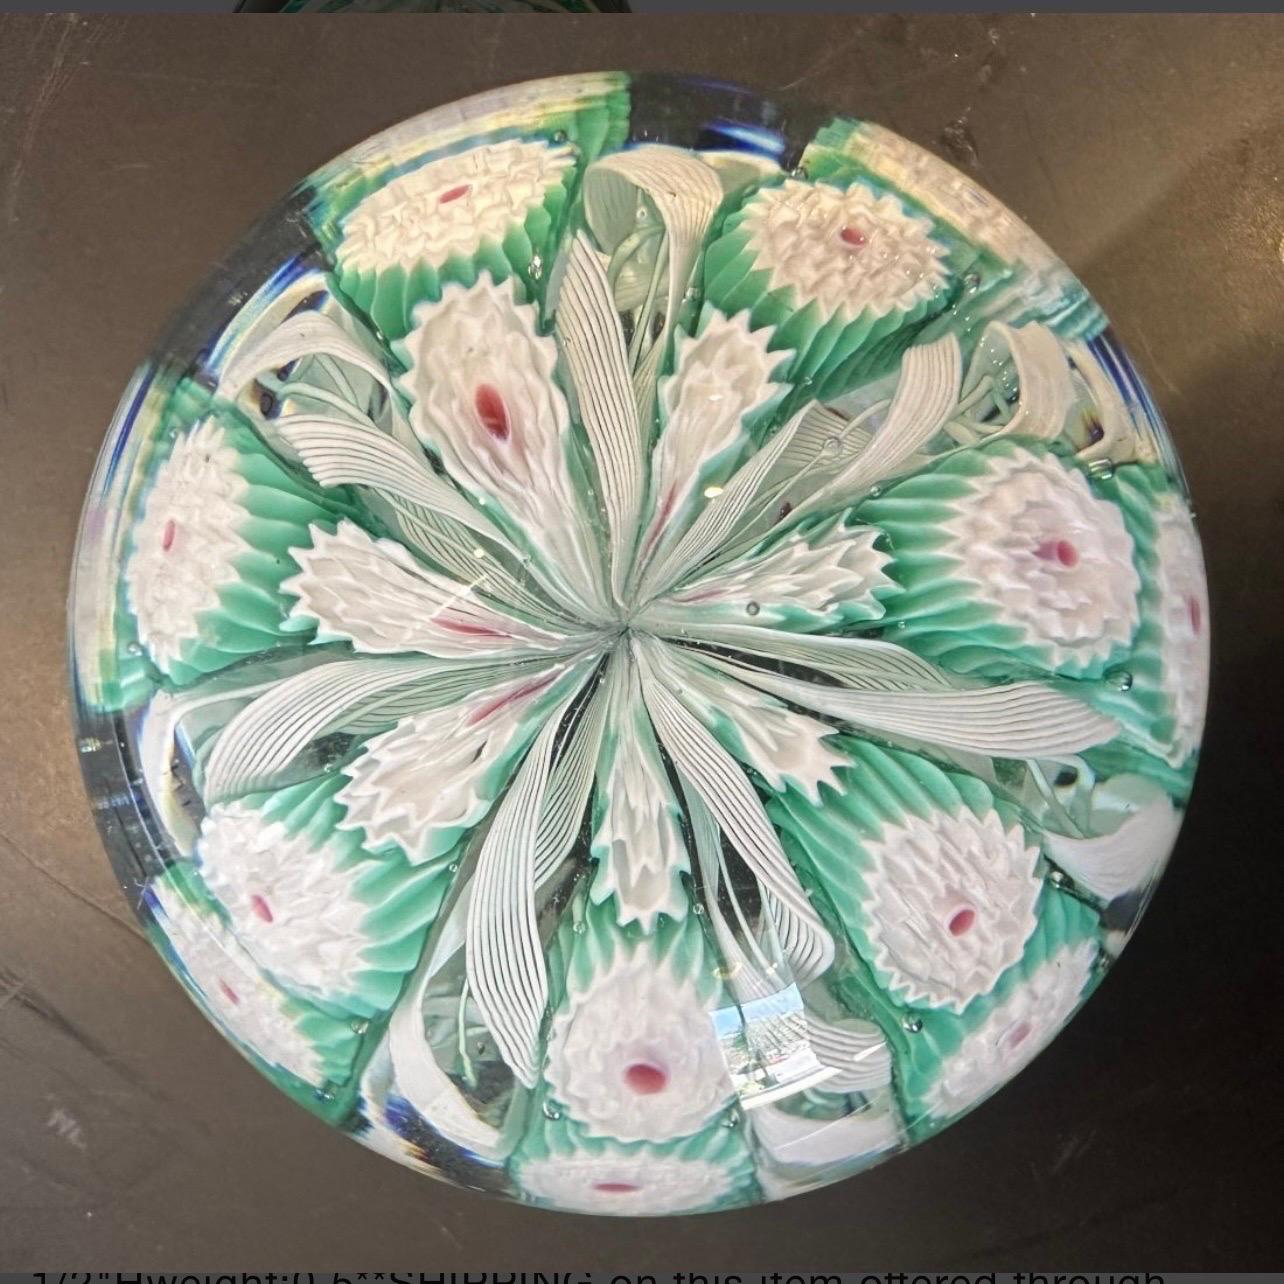 Beautiful Murano Paperweight with sticker still intact. This piece is exceptional with beautiful green and white spiral trellis with white millefori flowers with a pink center. 
Murano Fratelli Toso Glass
Murano millefiori 
91/4